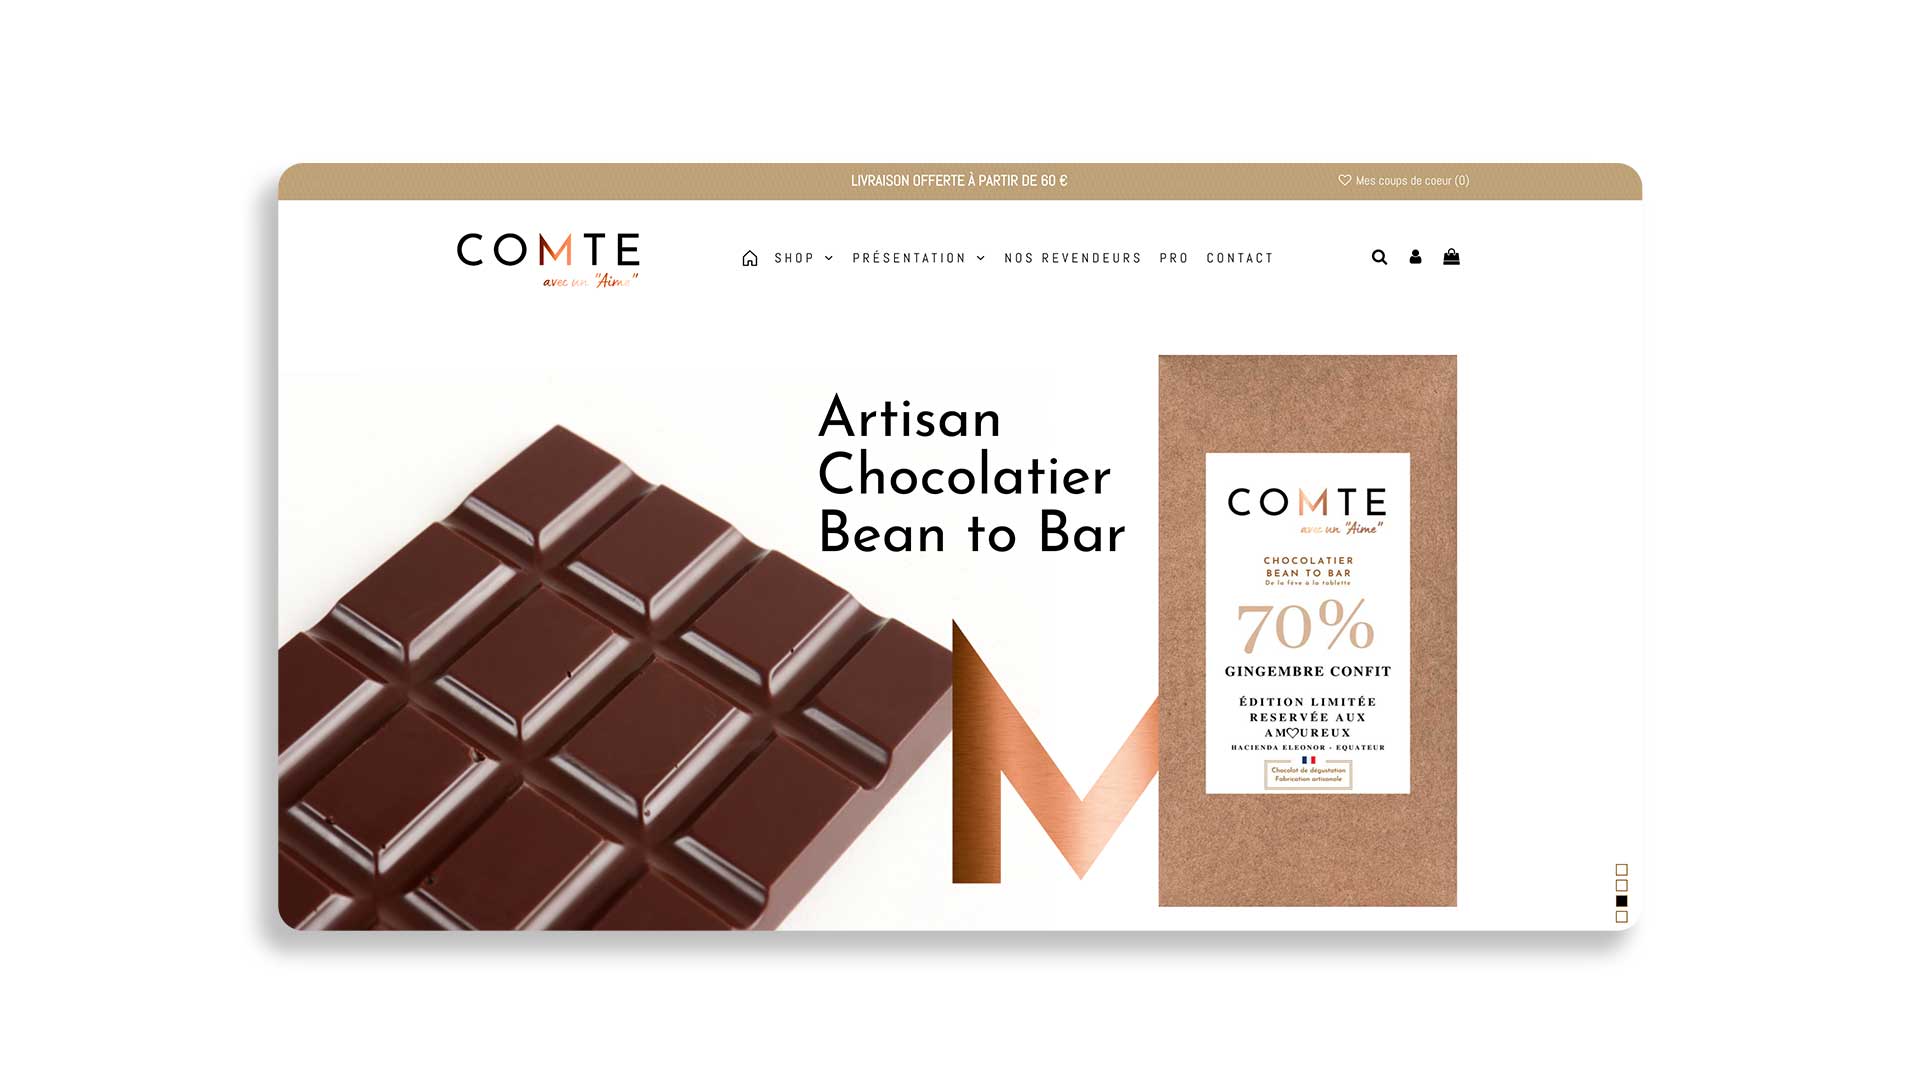 dixionline-montpellier-agence-web-marketing-site-web-referencement-seo-REAL-web-ecommerce-comte-chocolatier-full-1